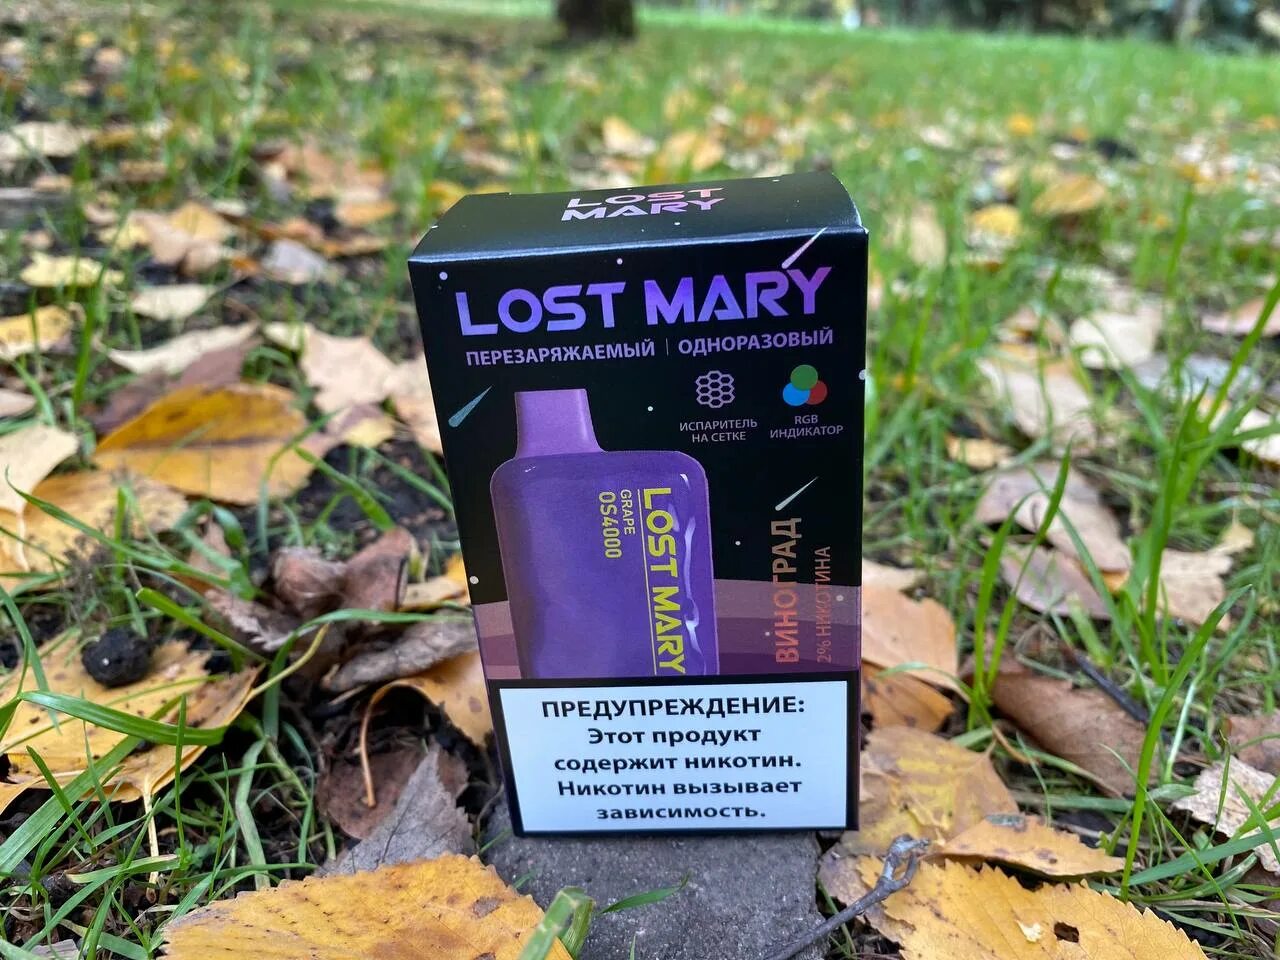 Lost Mary grape. Lost mary индикатор